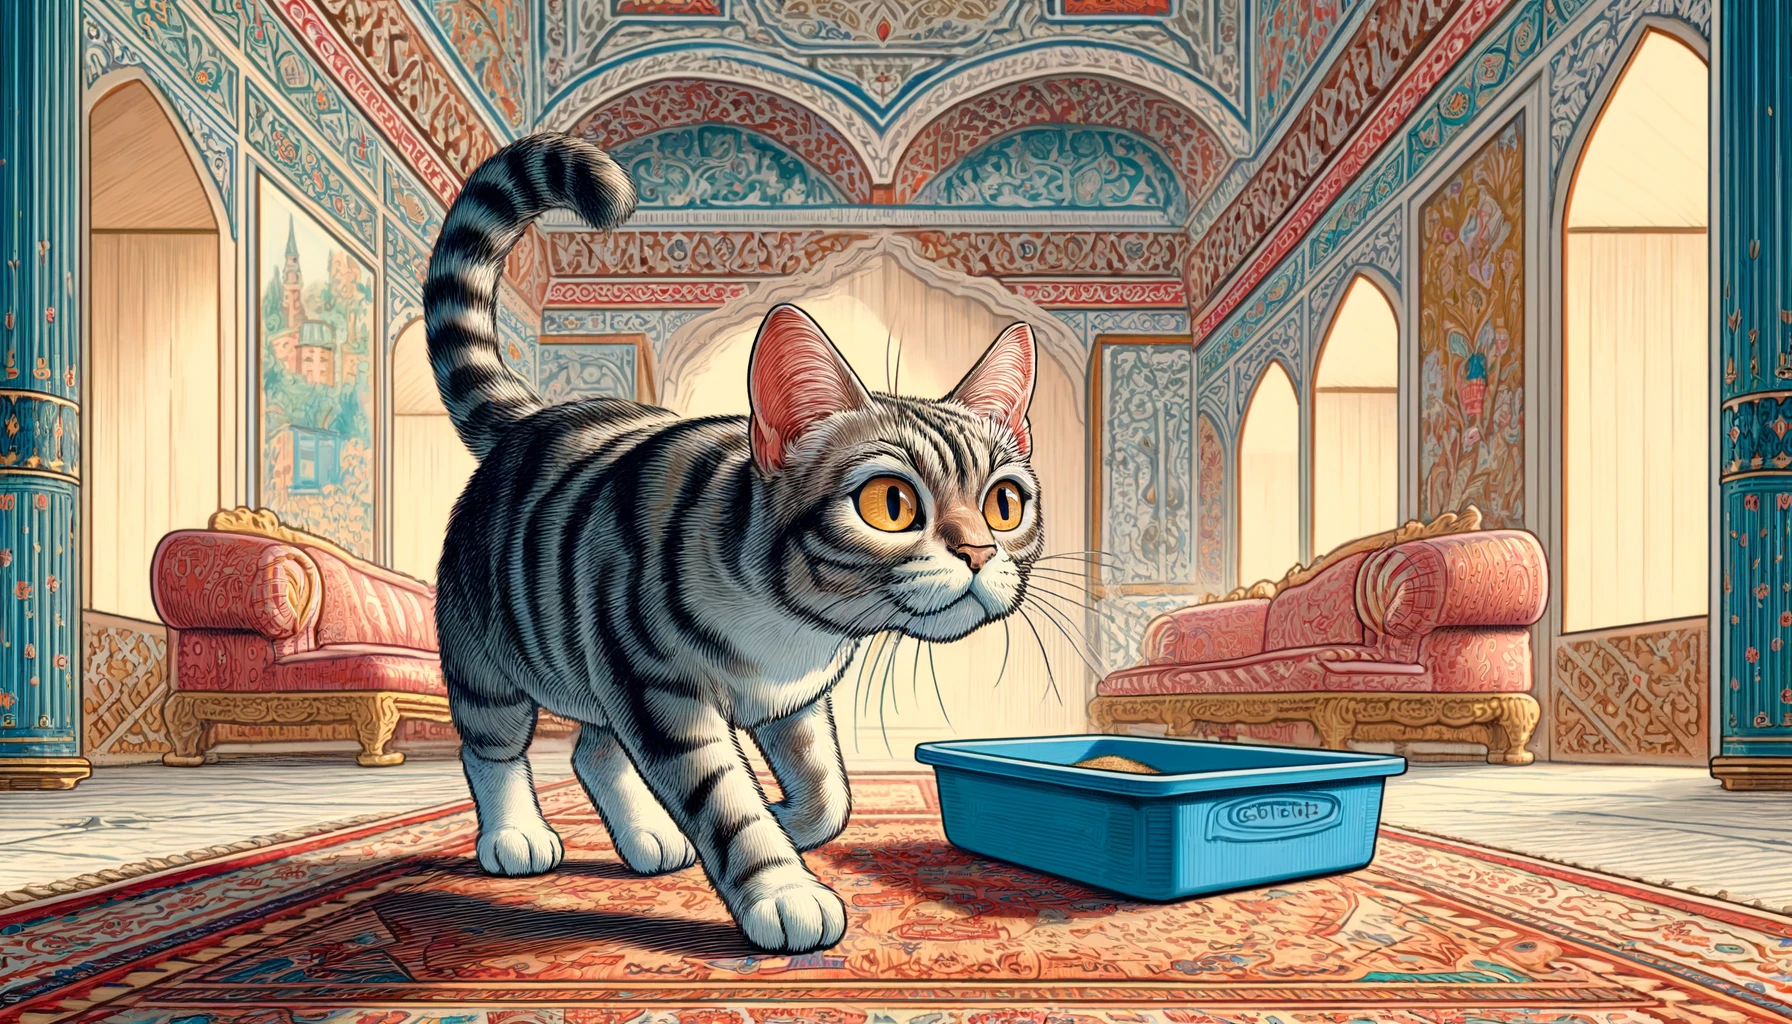 Cartoon depiction of a cat detecting the scent of its litter box from afar in an Ottoman art styled room.